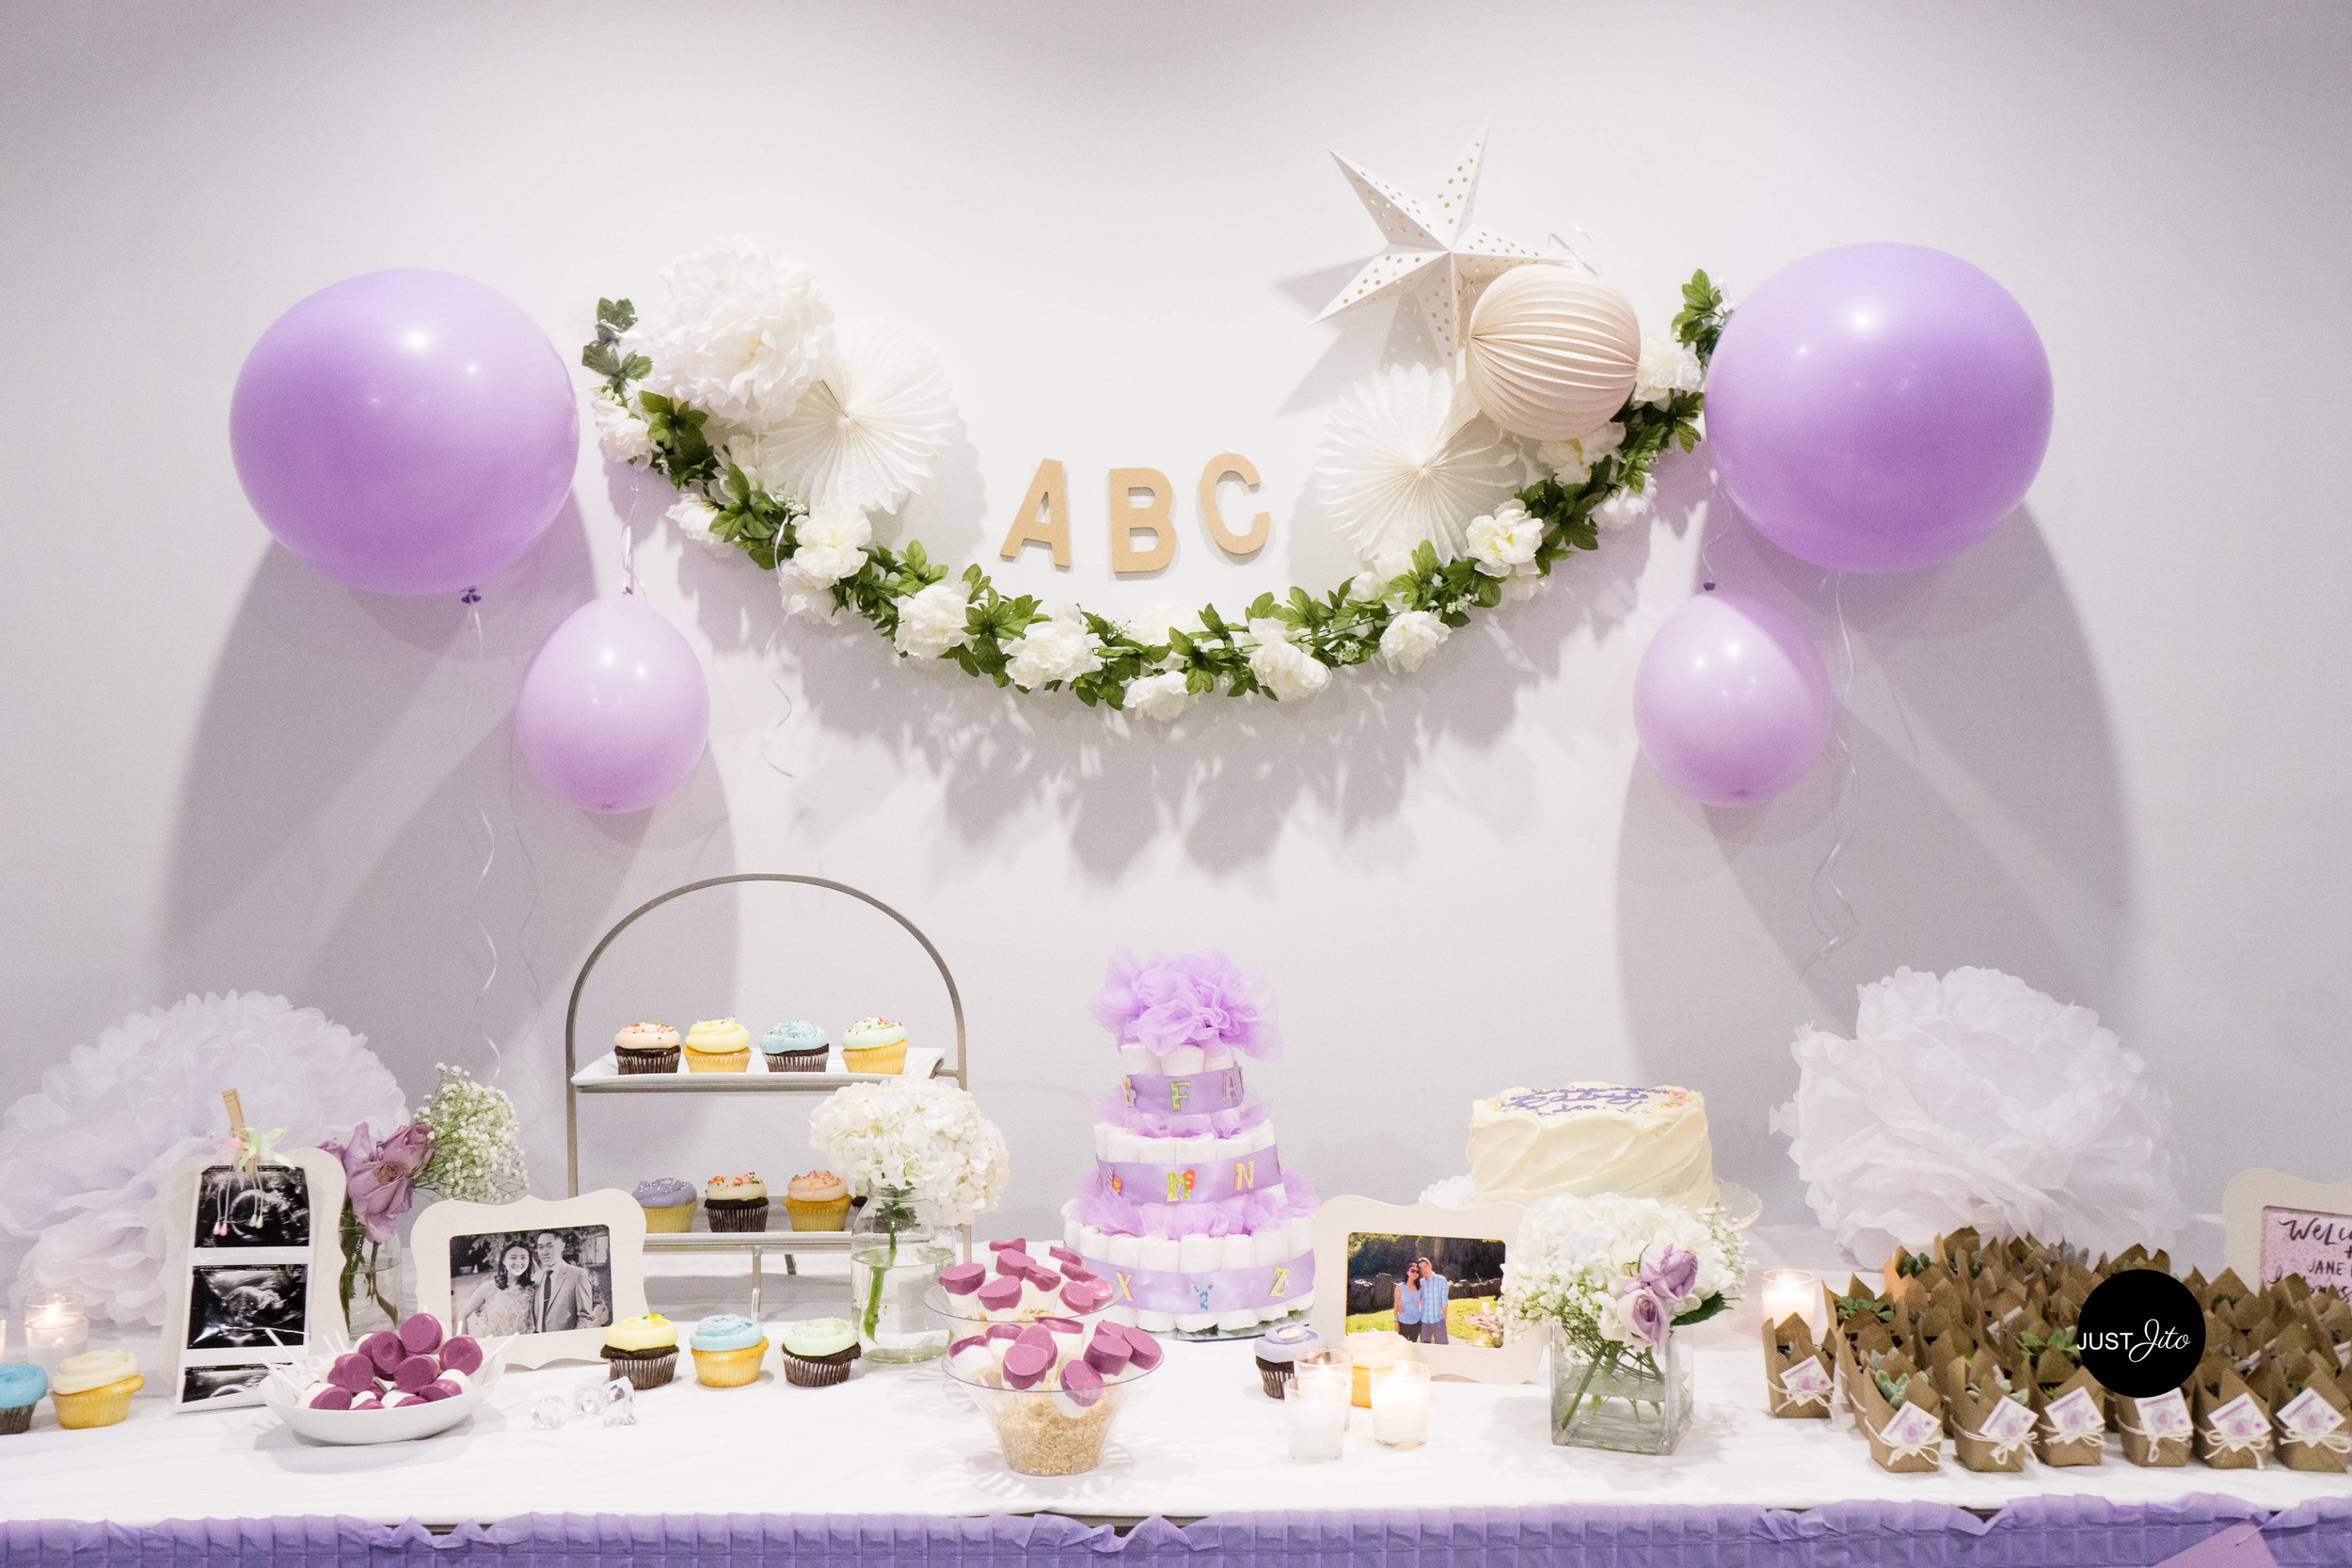 Neutral Baby Shower Decor The Mama-to-Be Will Love - hostessology